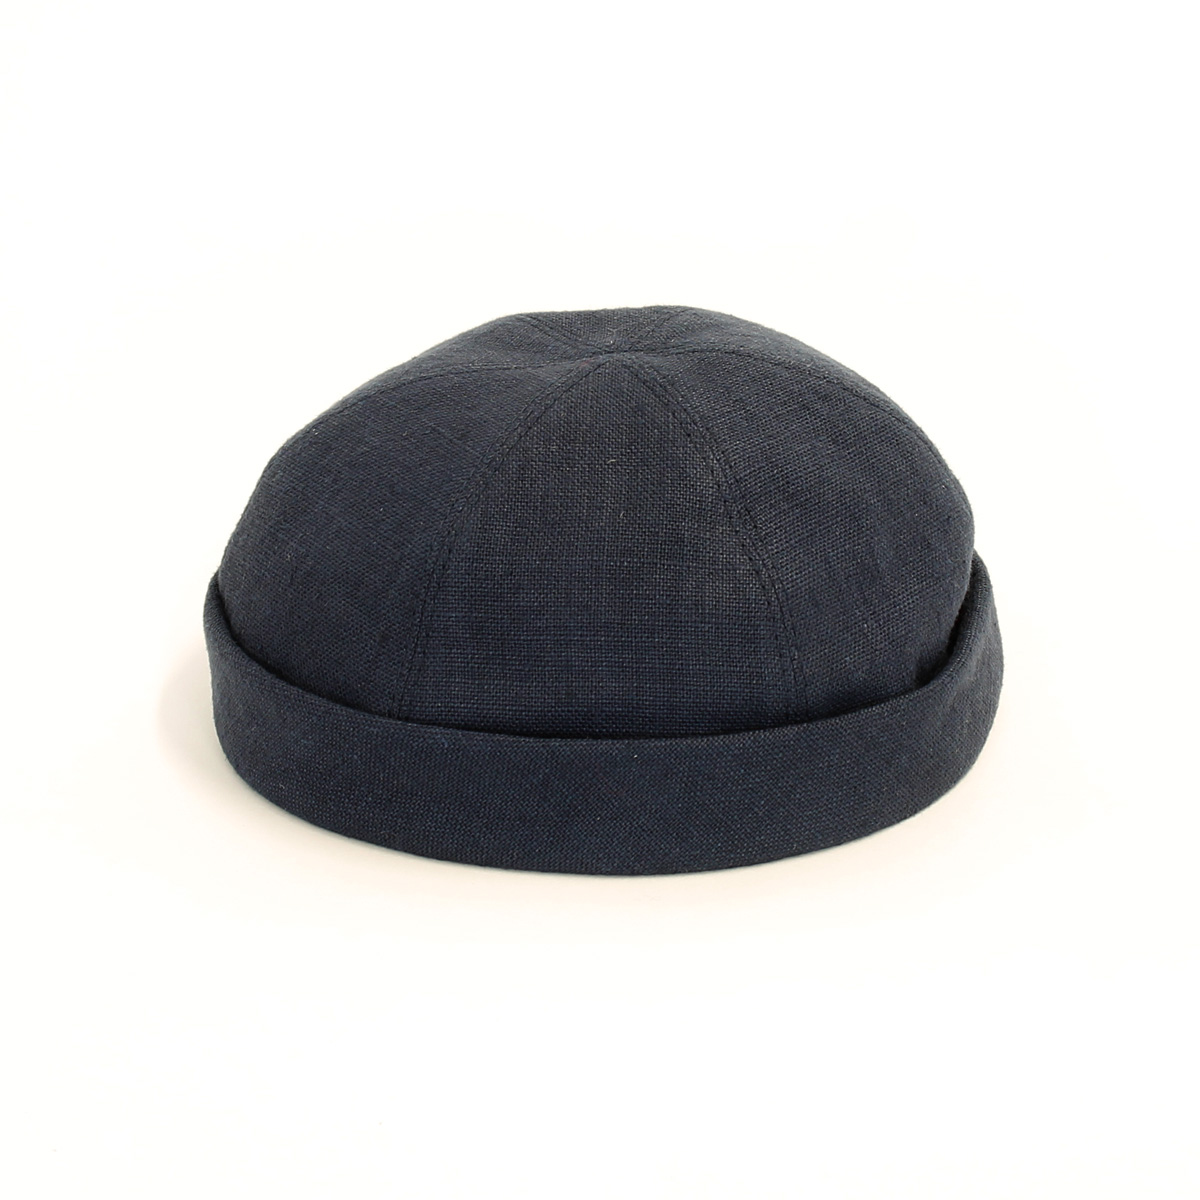 Sailor Hat Made From 100% Wool Bullani Docker Cap Docking Hat Made in Germany Comfortable & Skin Friendly 